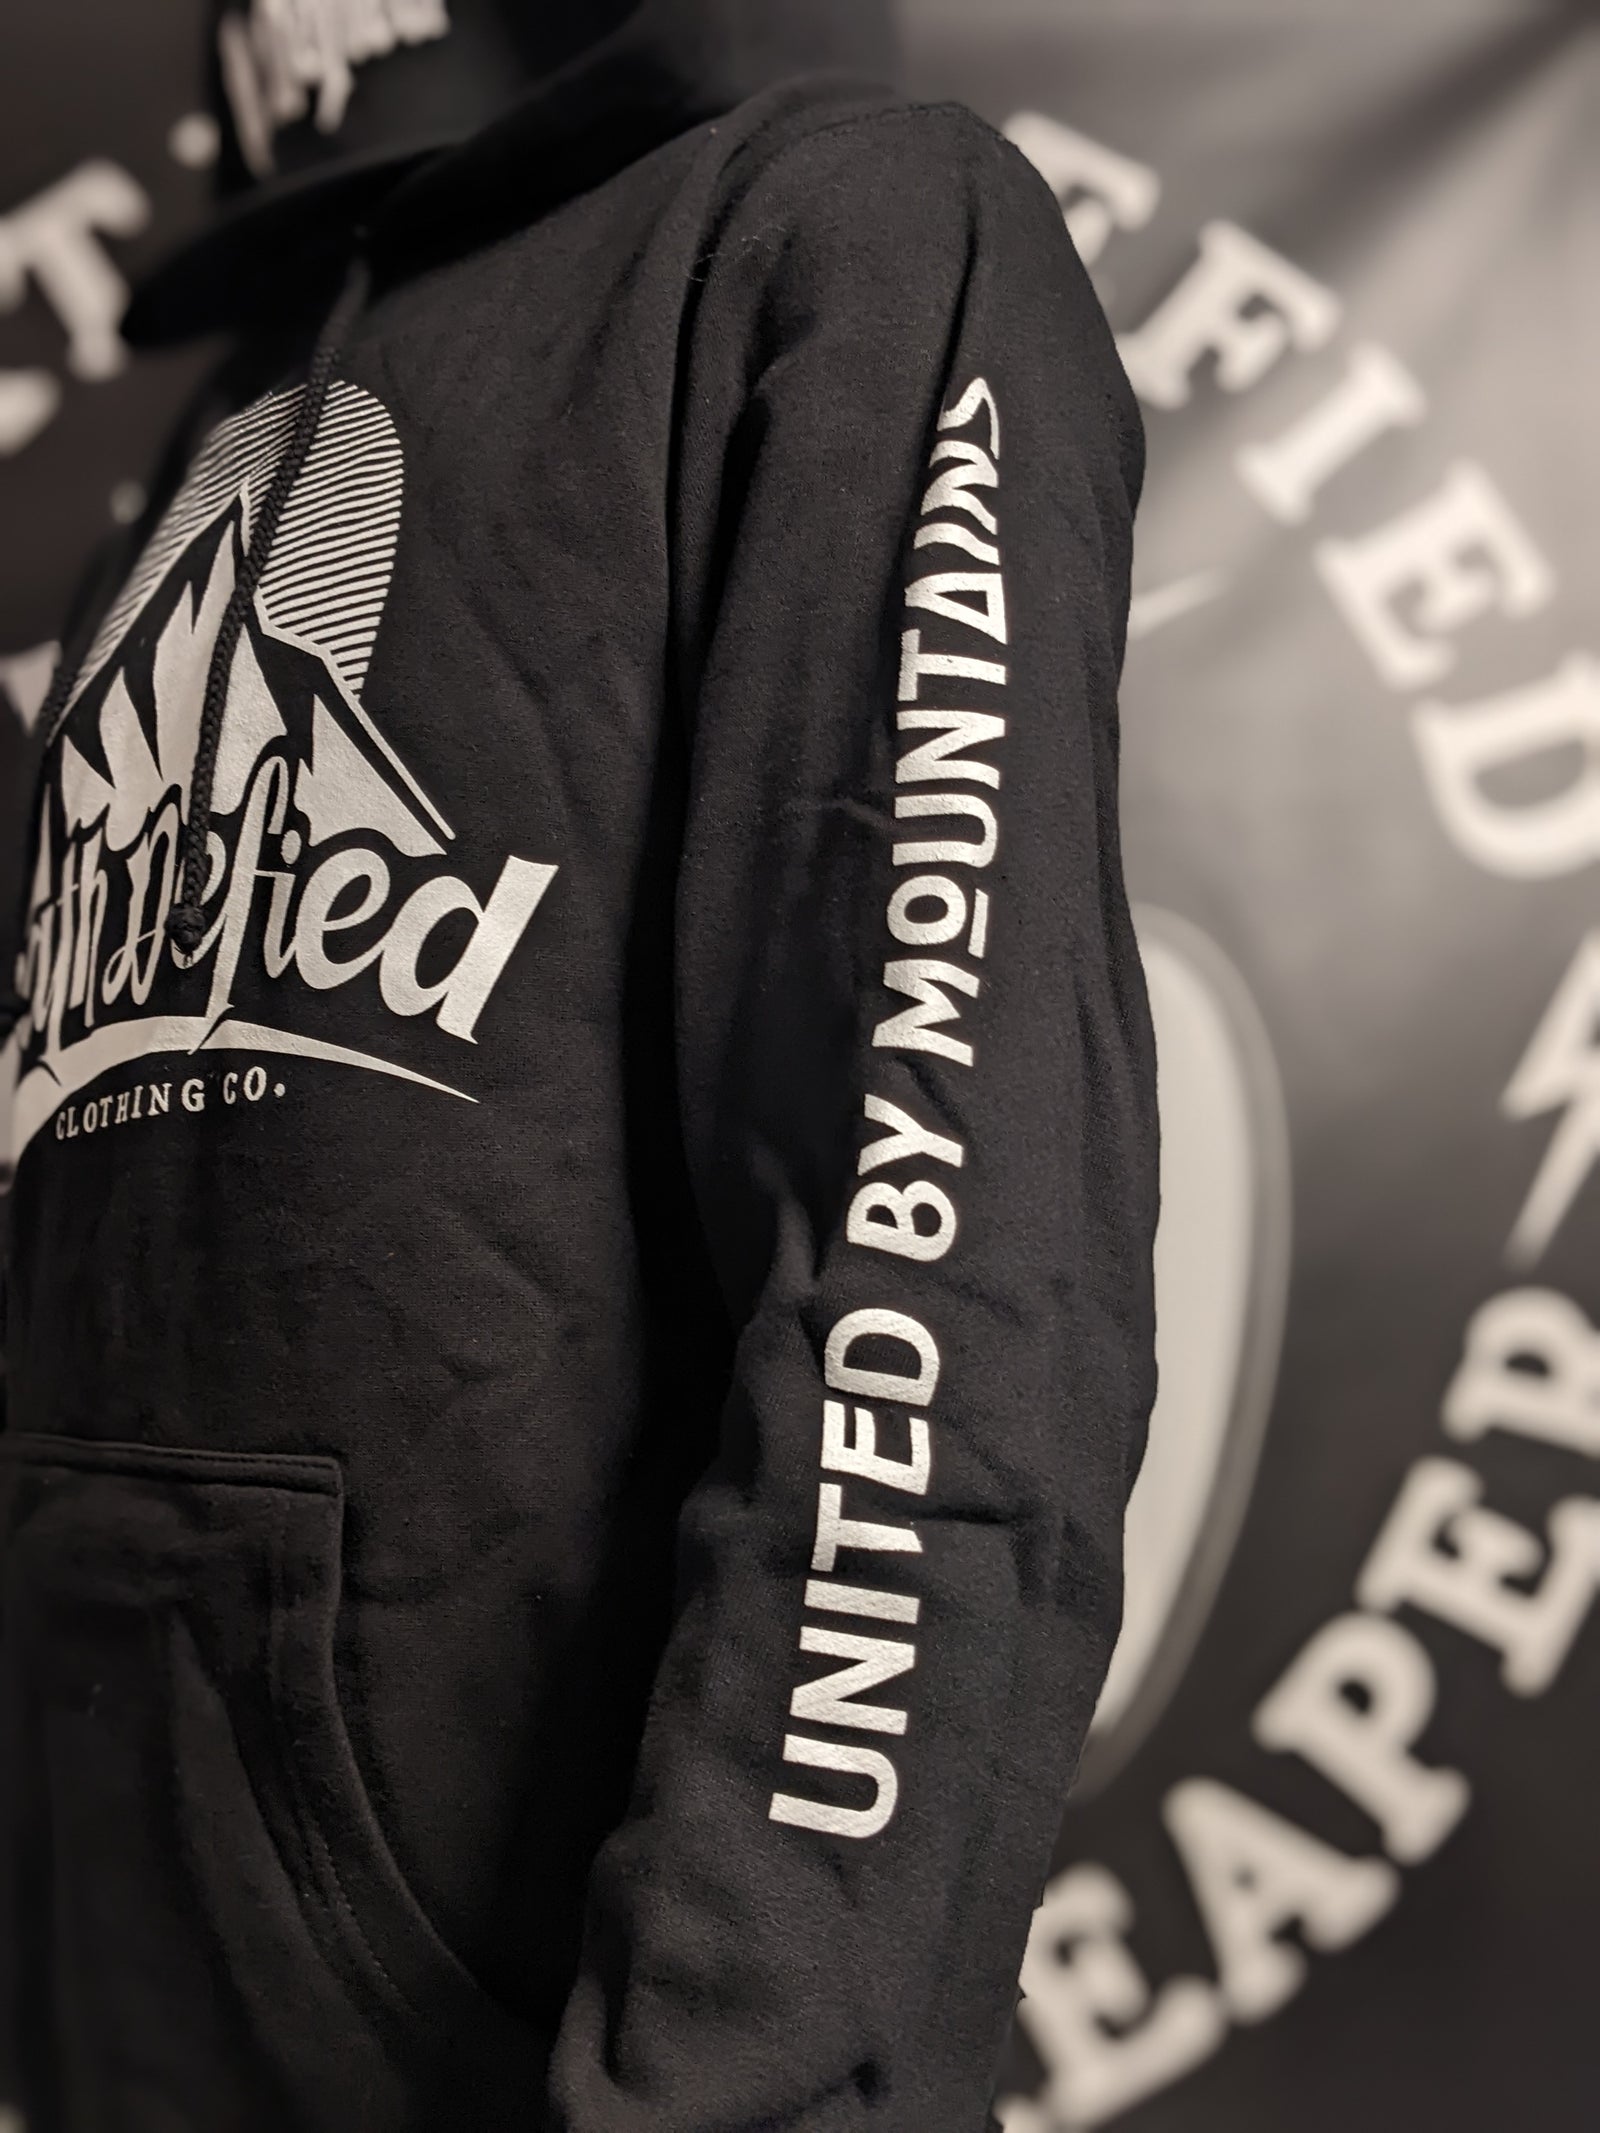 United by Mountains pullover hoodie